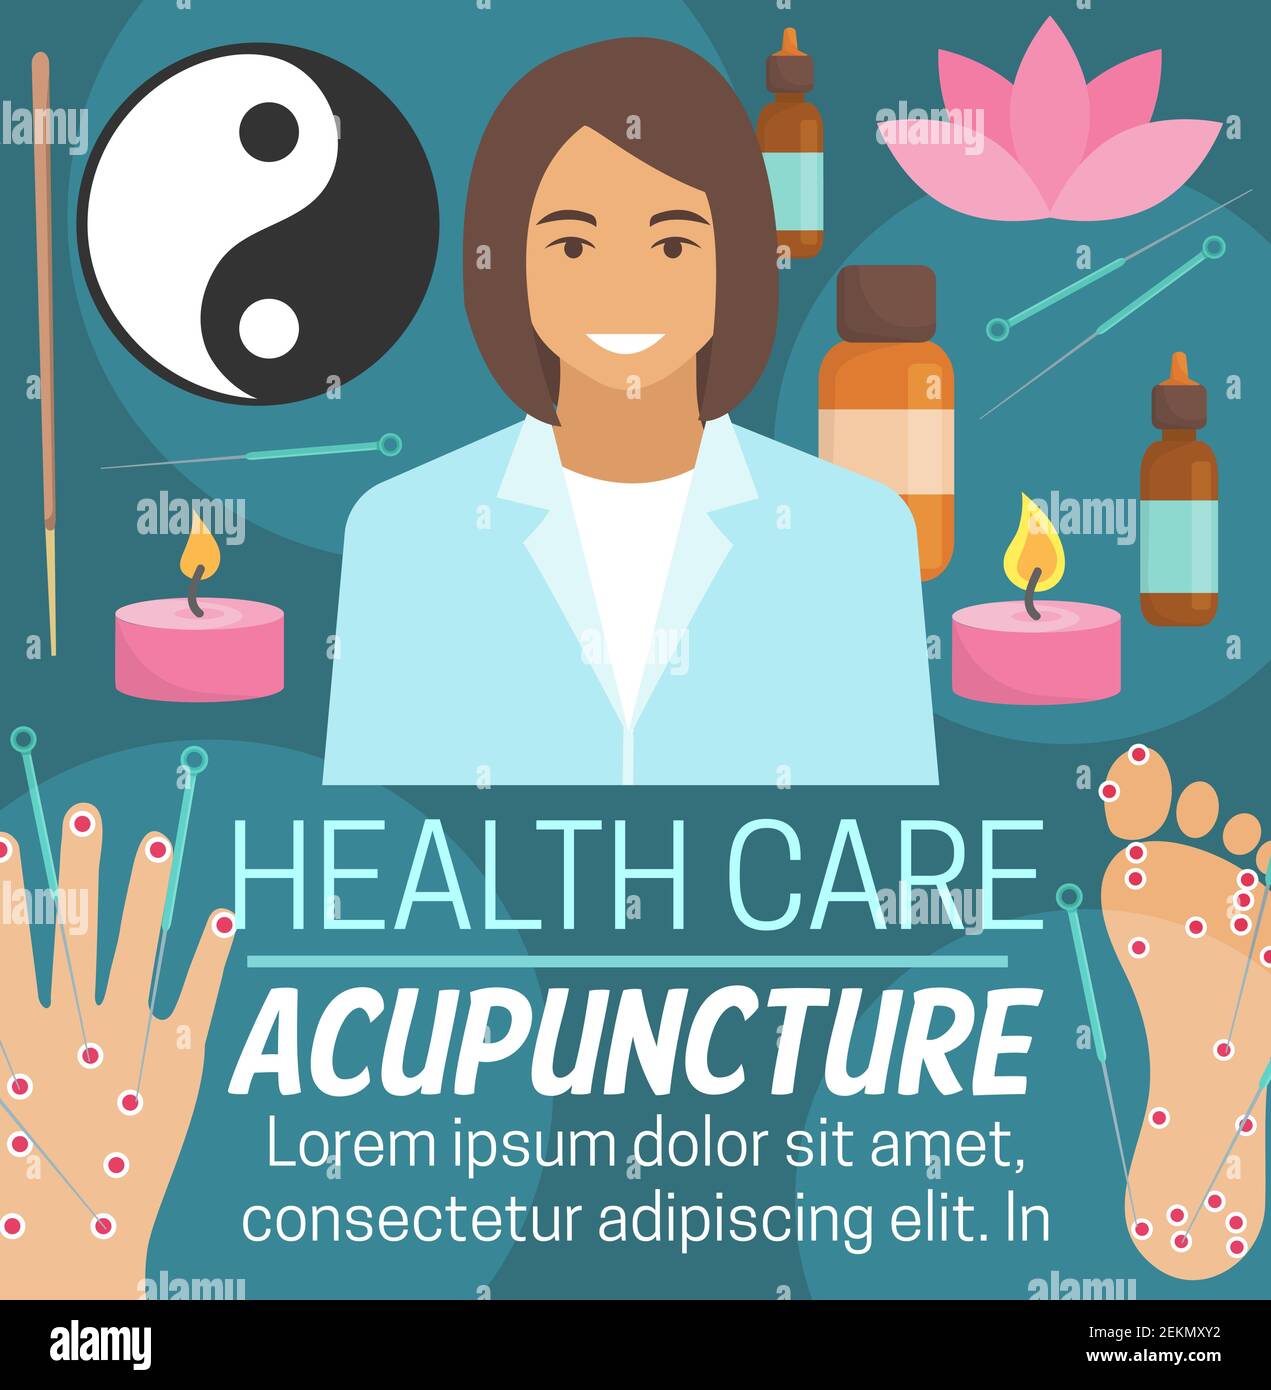 Acupuncture alternative medicine or Chinese traditional medical needle therapy. Vector acupuncture doctor with medical aromatherapy essential oils, ca Stock Vector